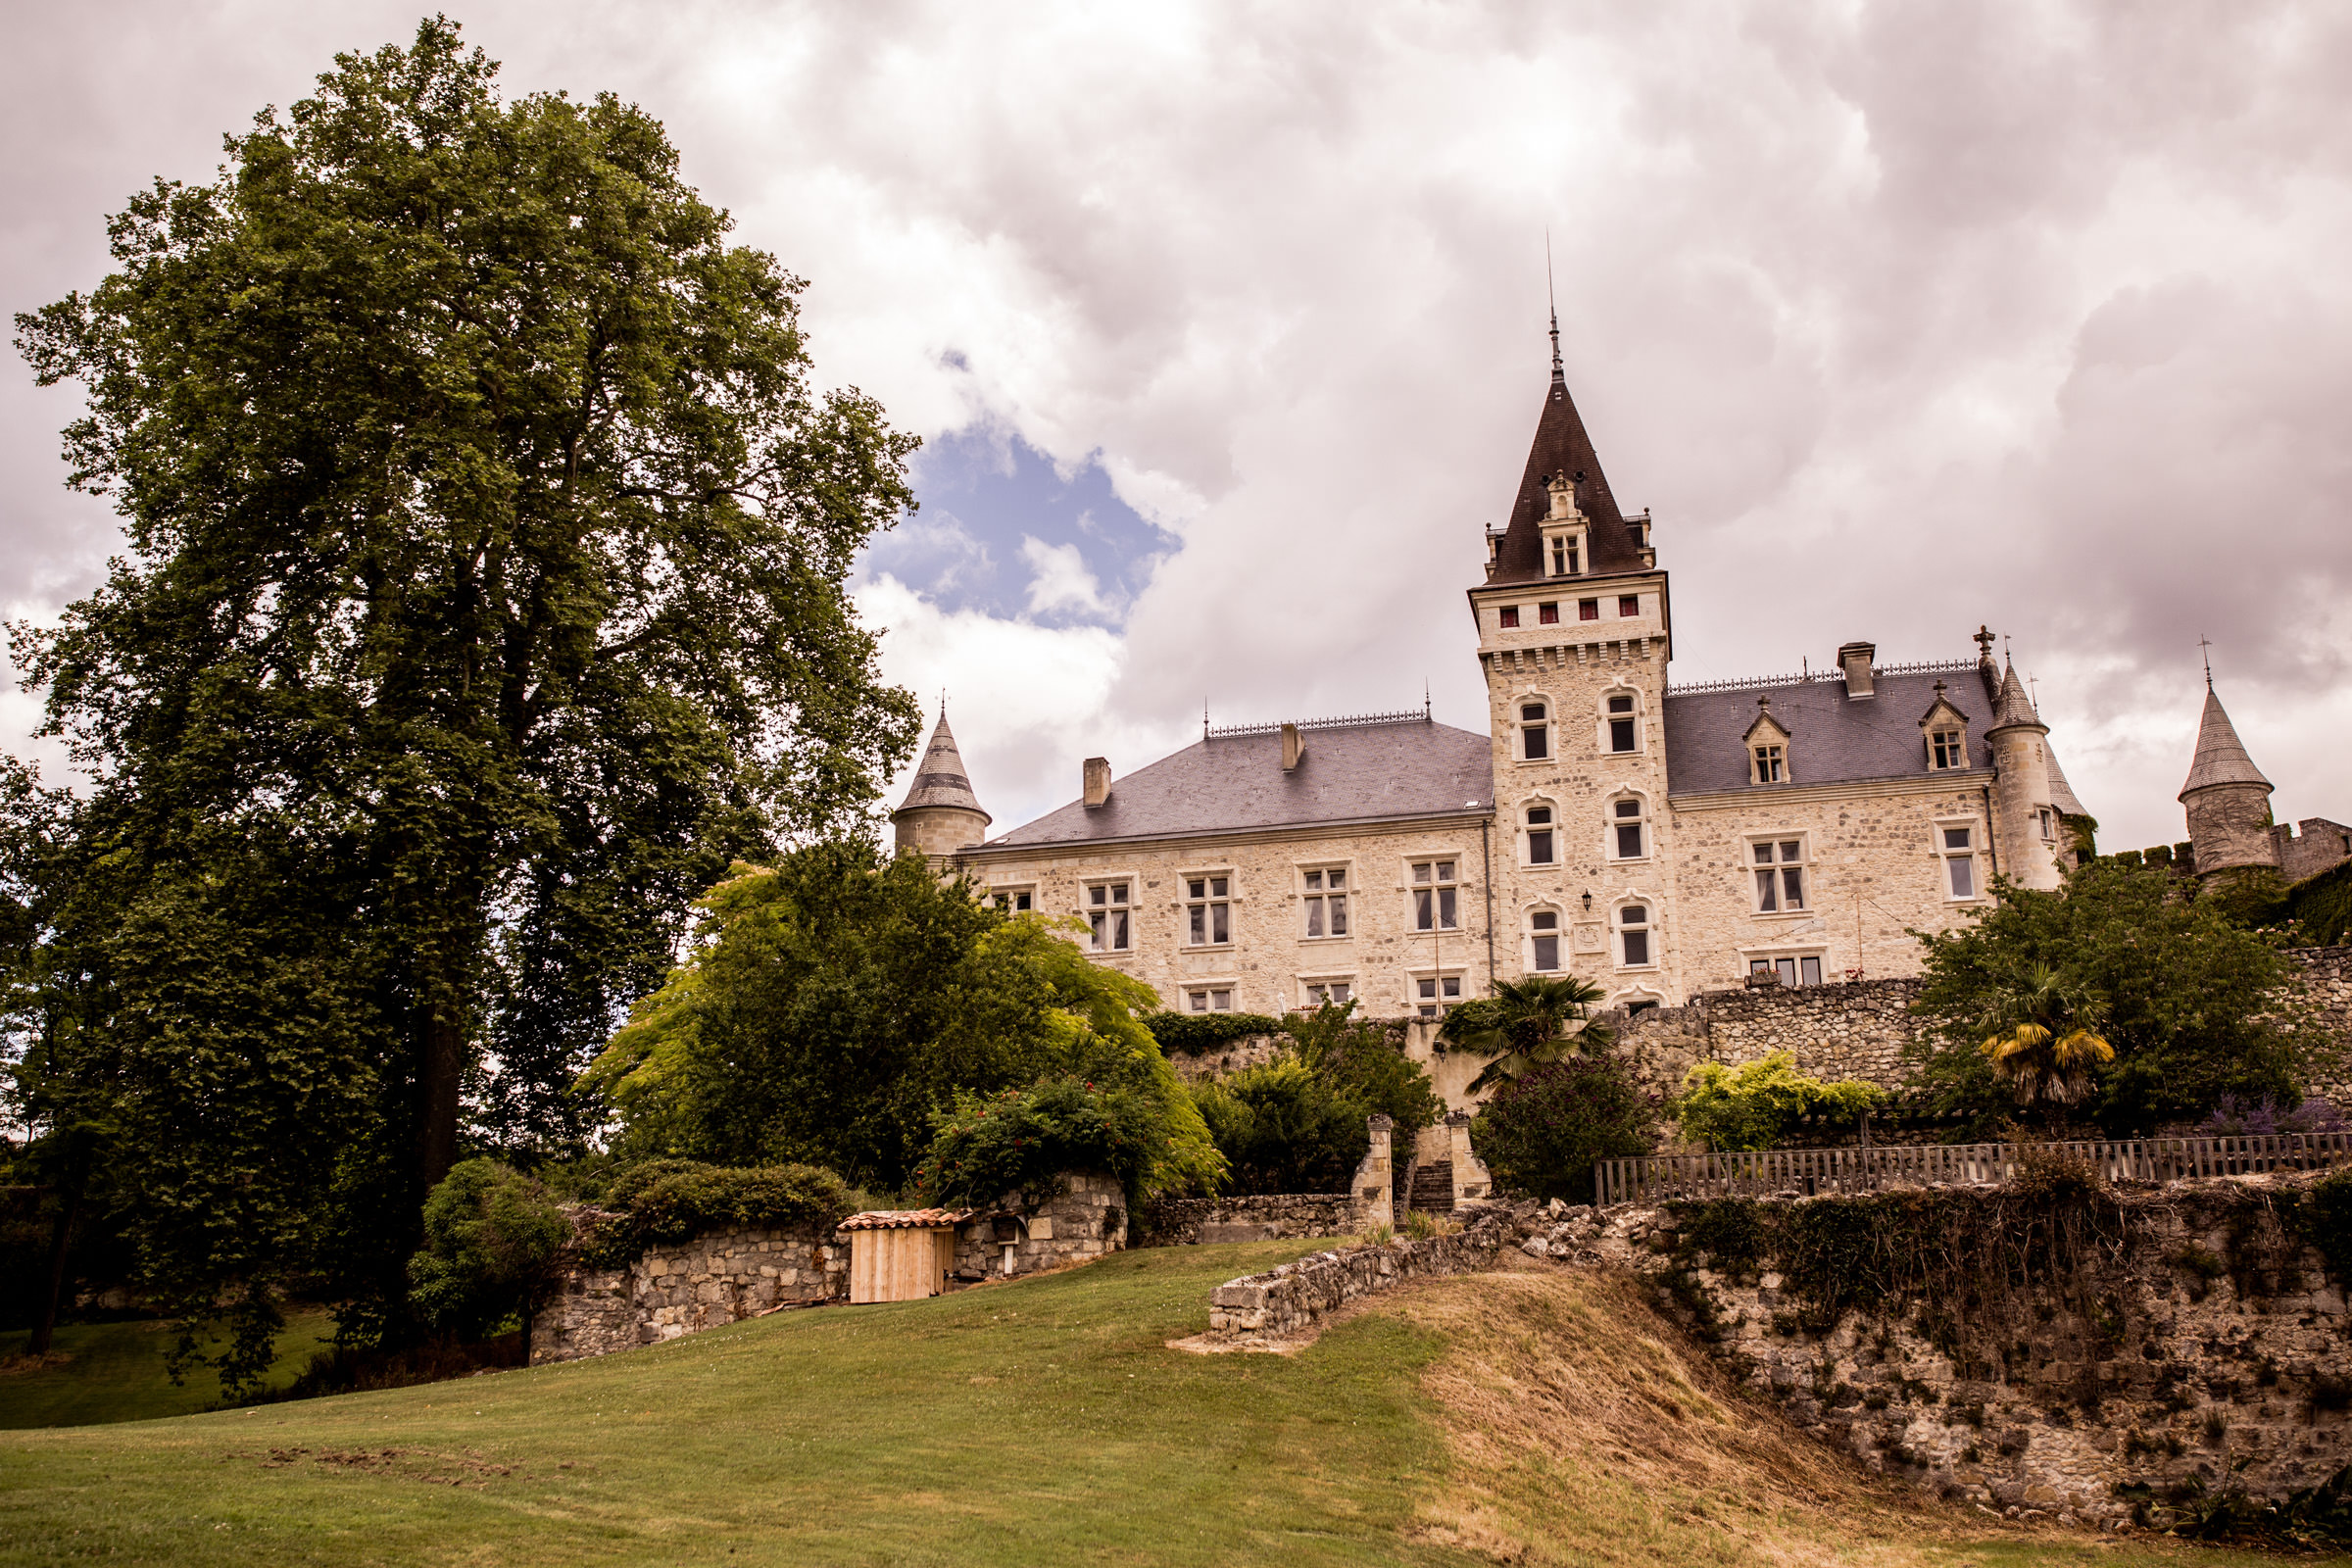 Uk Wedding photographers working at chateau de lisse in gascony 001.jpg